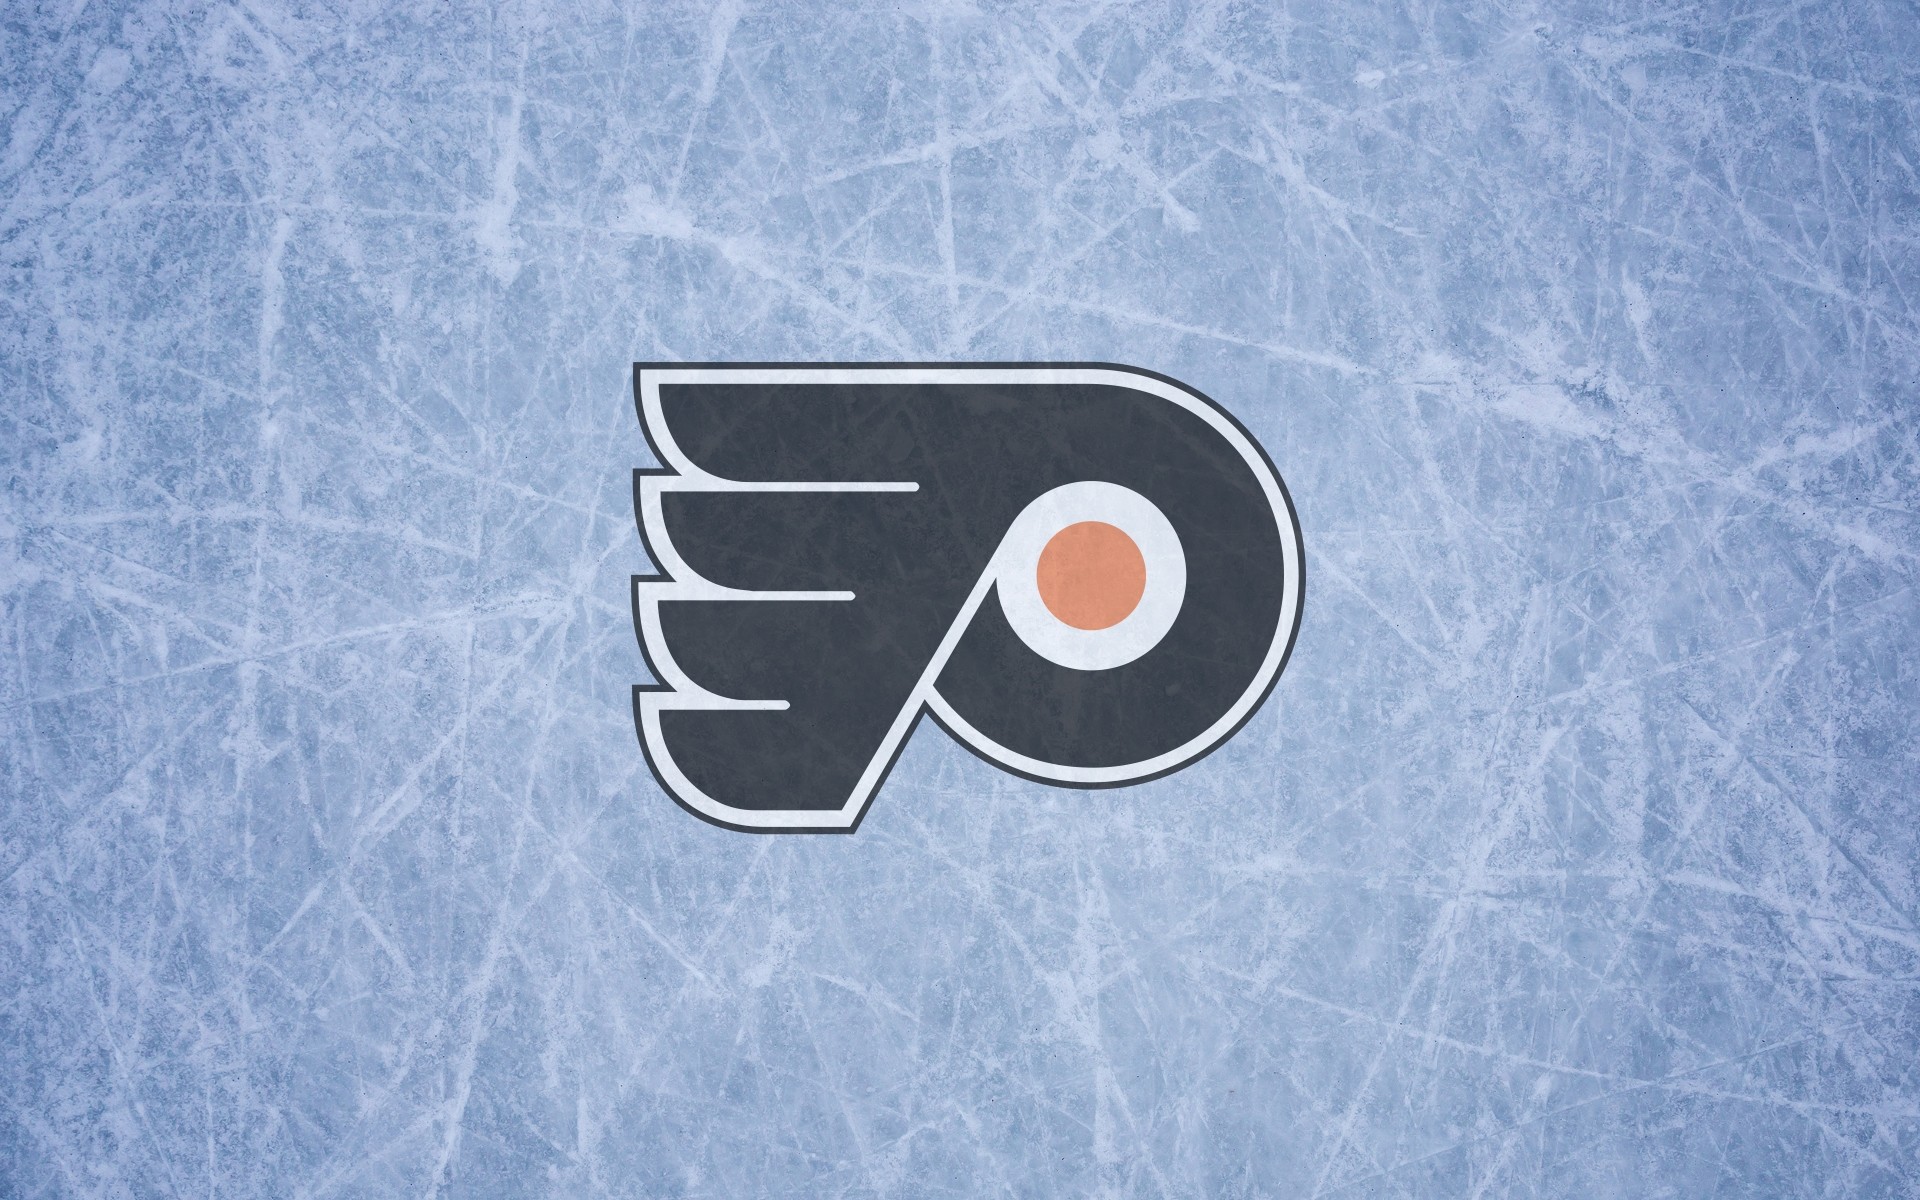 Philadelphia Flyers wallpaper with logo and ice 1920x1200px, 16×10